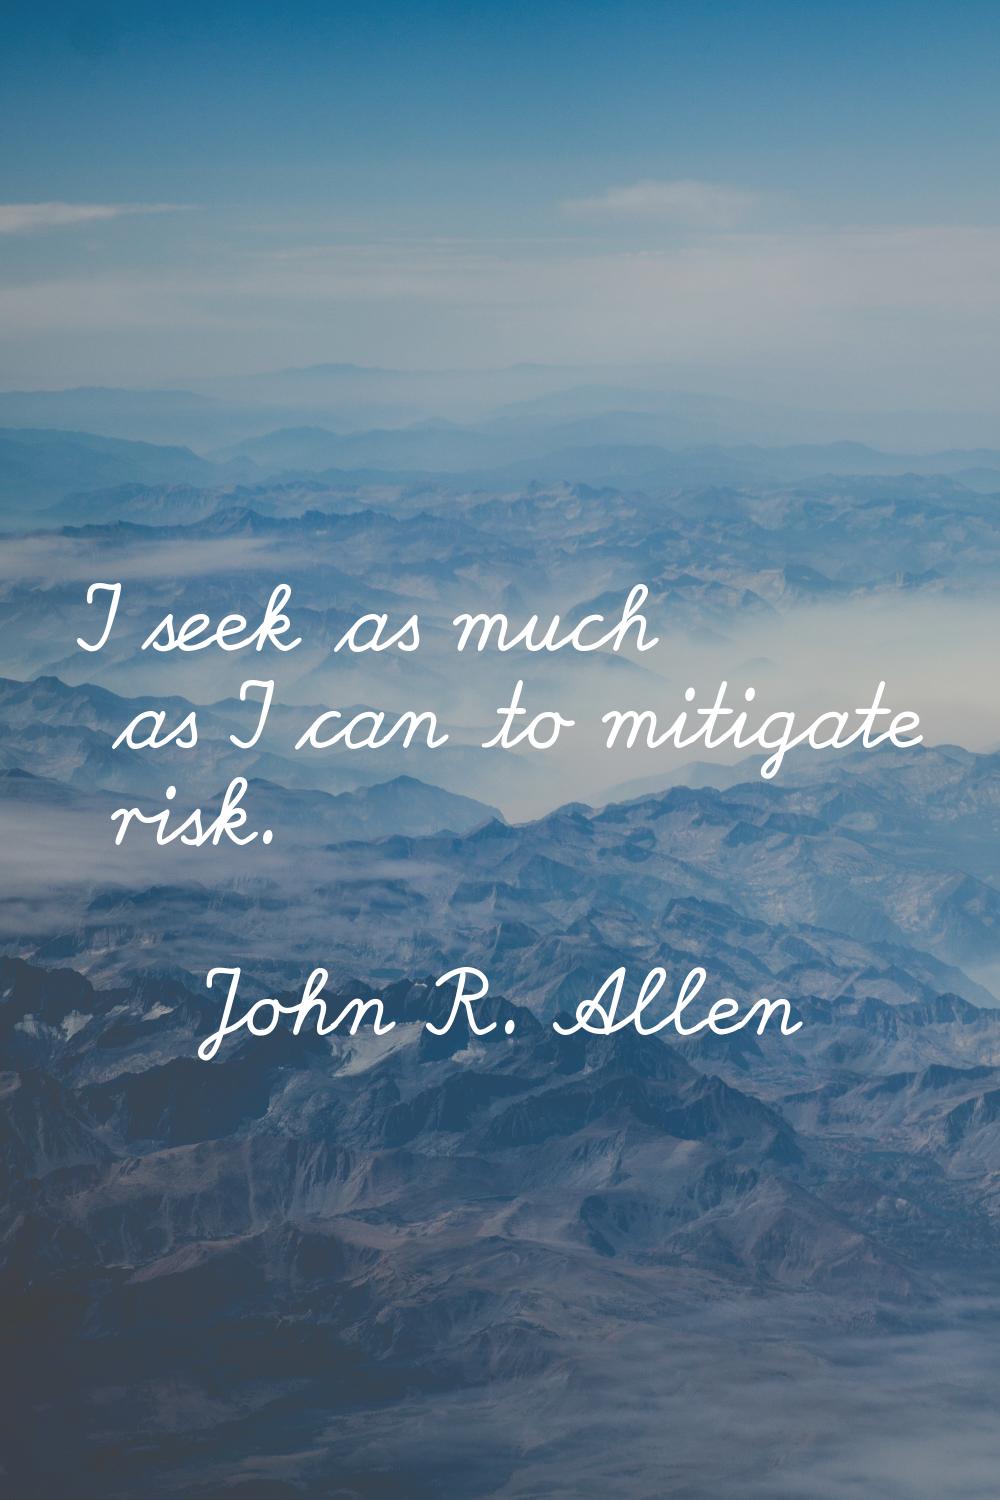 I seek as much as I can to mitigate risk.